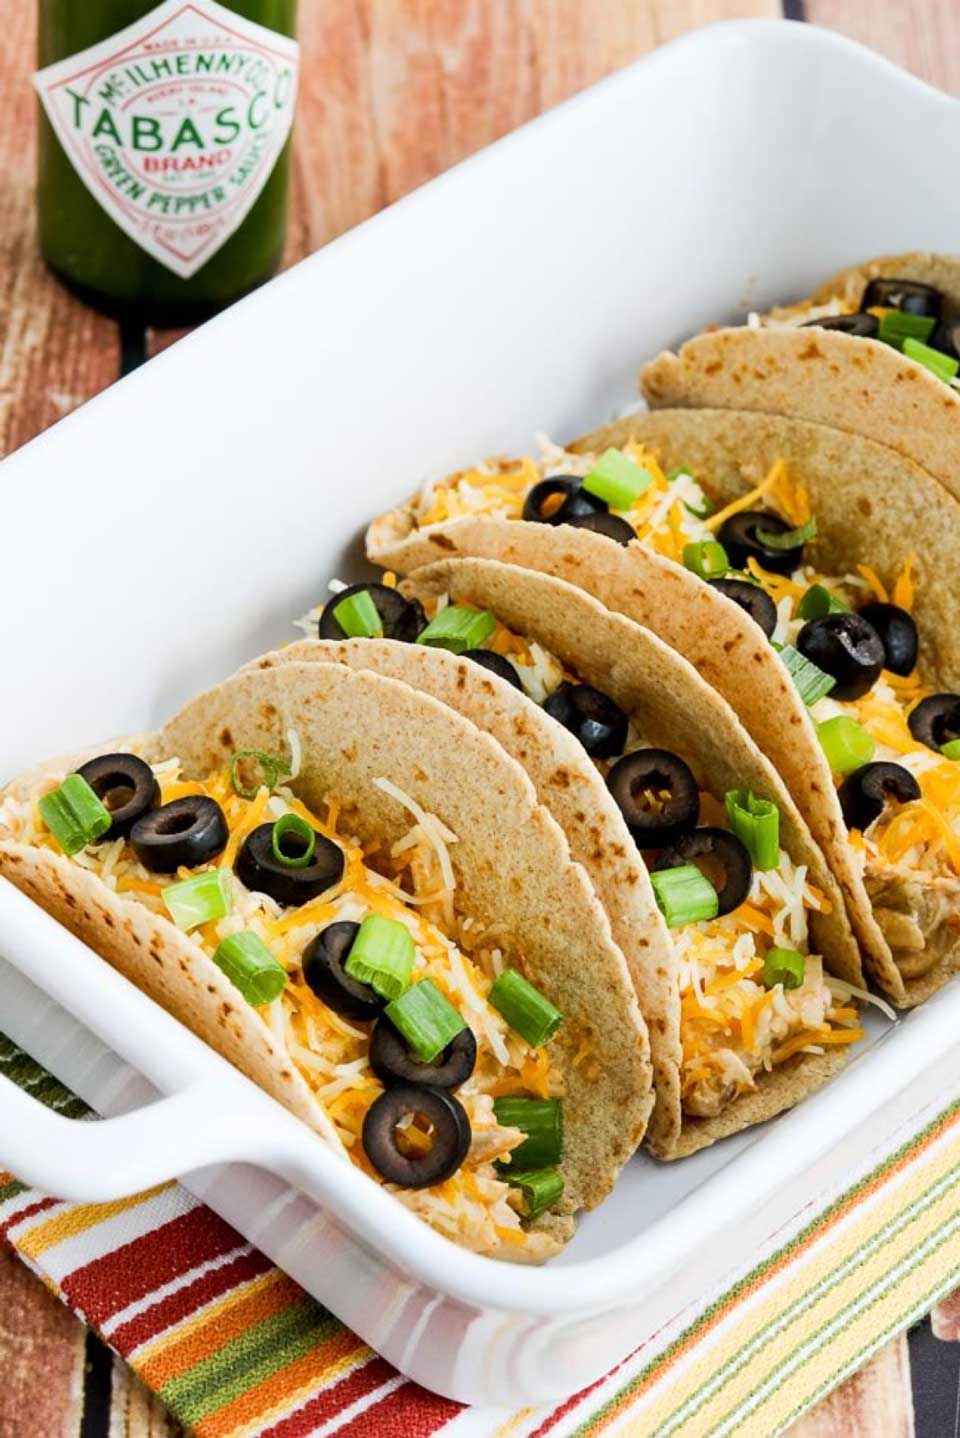 Your fiesta awaits … and tacos are ready in just minutes when you use your electric pressure cooker! And these Instant Pot Low-Carb Cheesy Chicken Tacos from Kalyn at Kalyn's Kitchen are just one of the Mexican-inspired recipes we’ve got lined up for you on our list of easy Instant Pot chicken dinners!